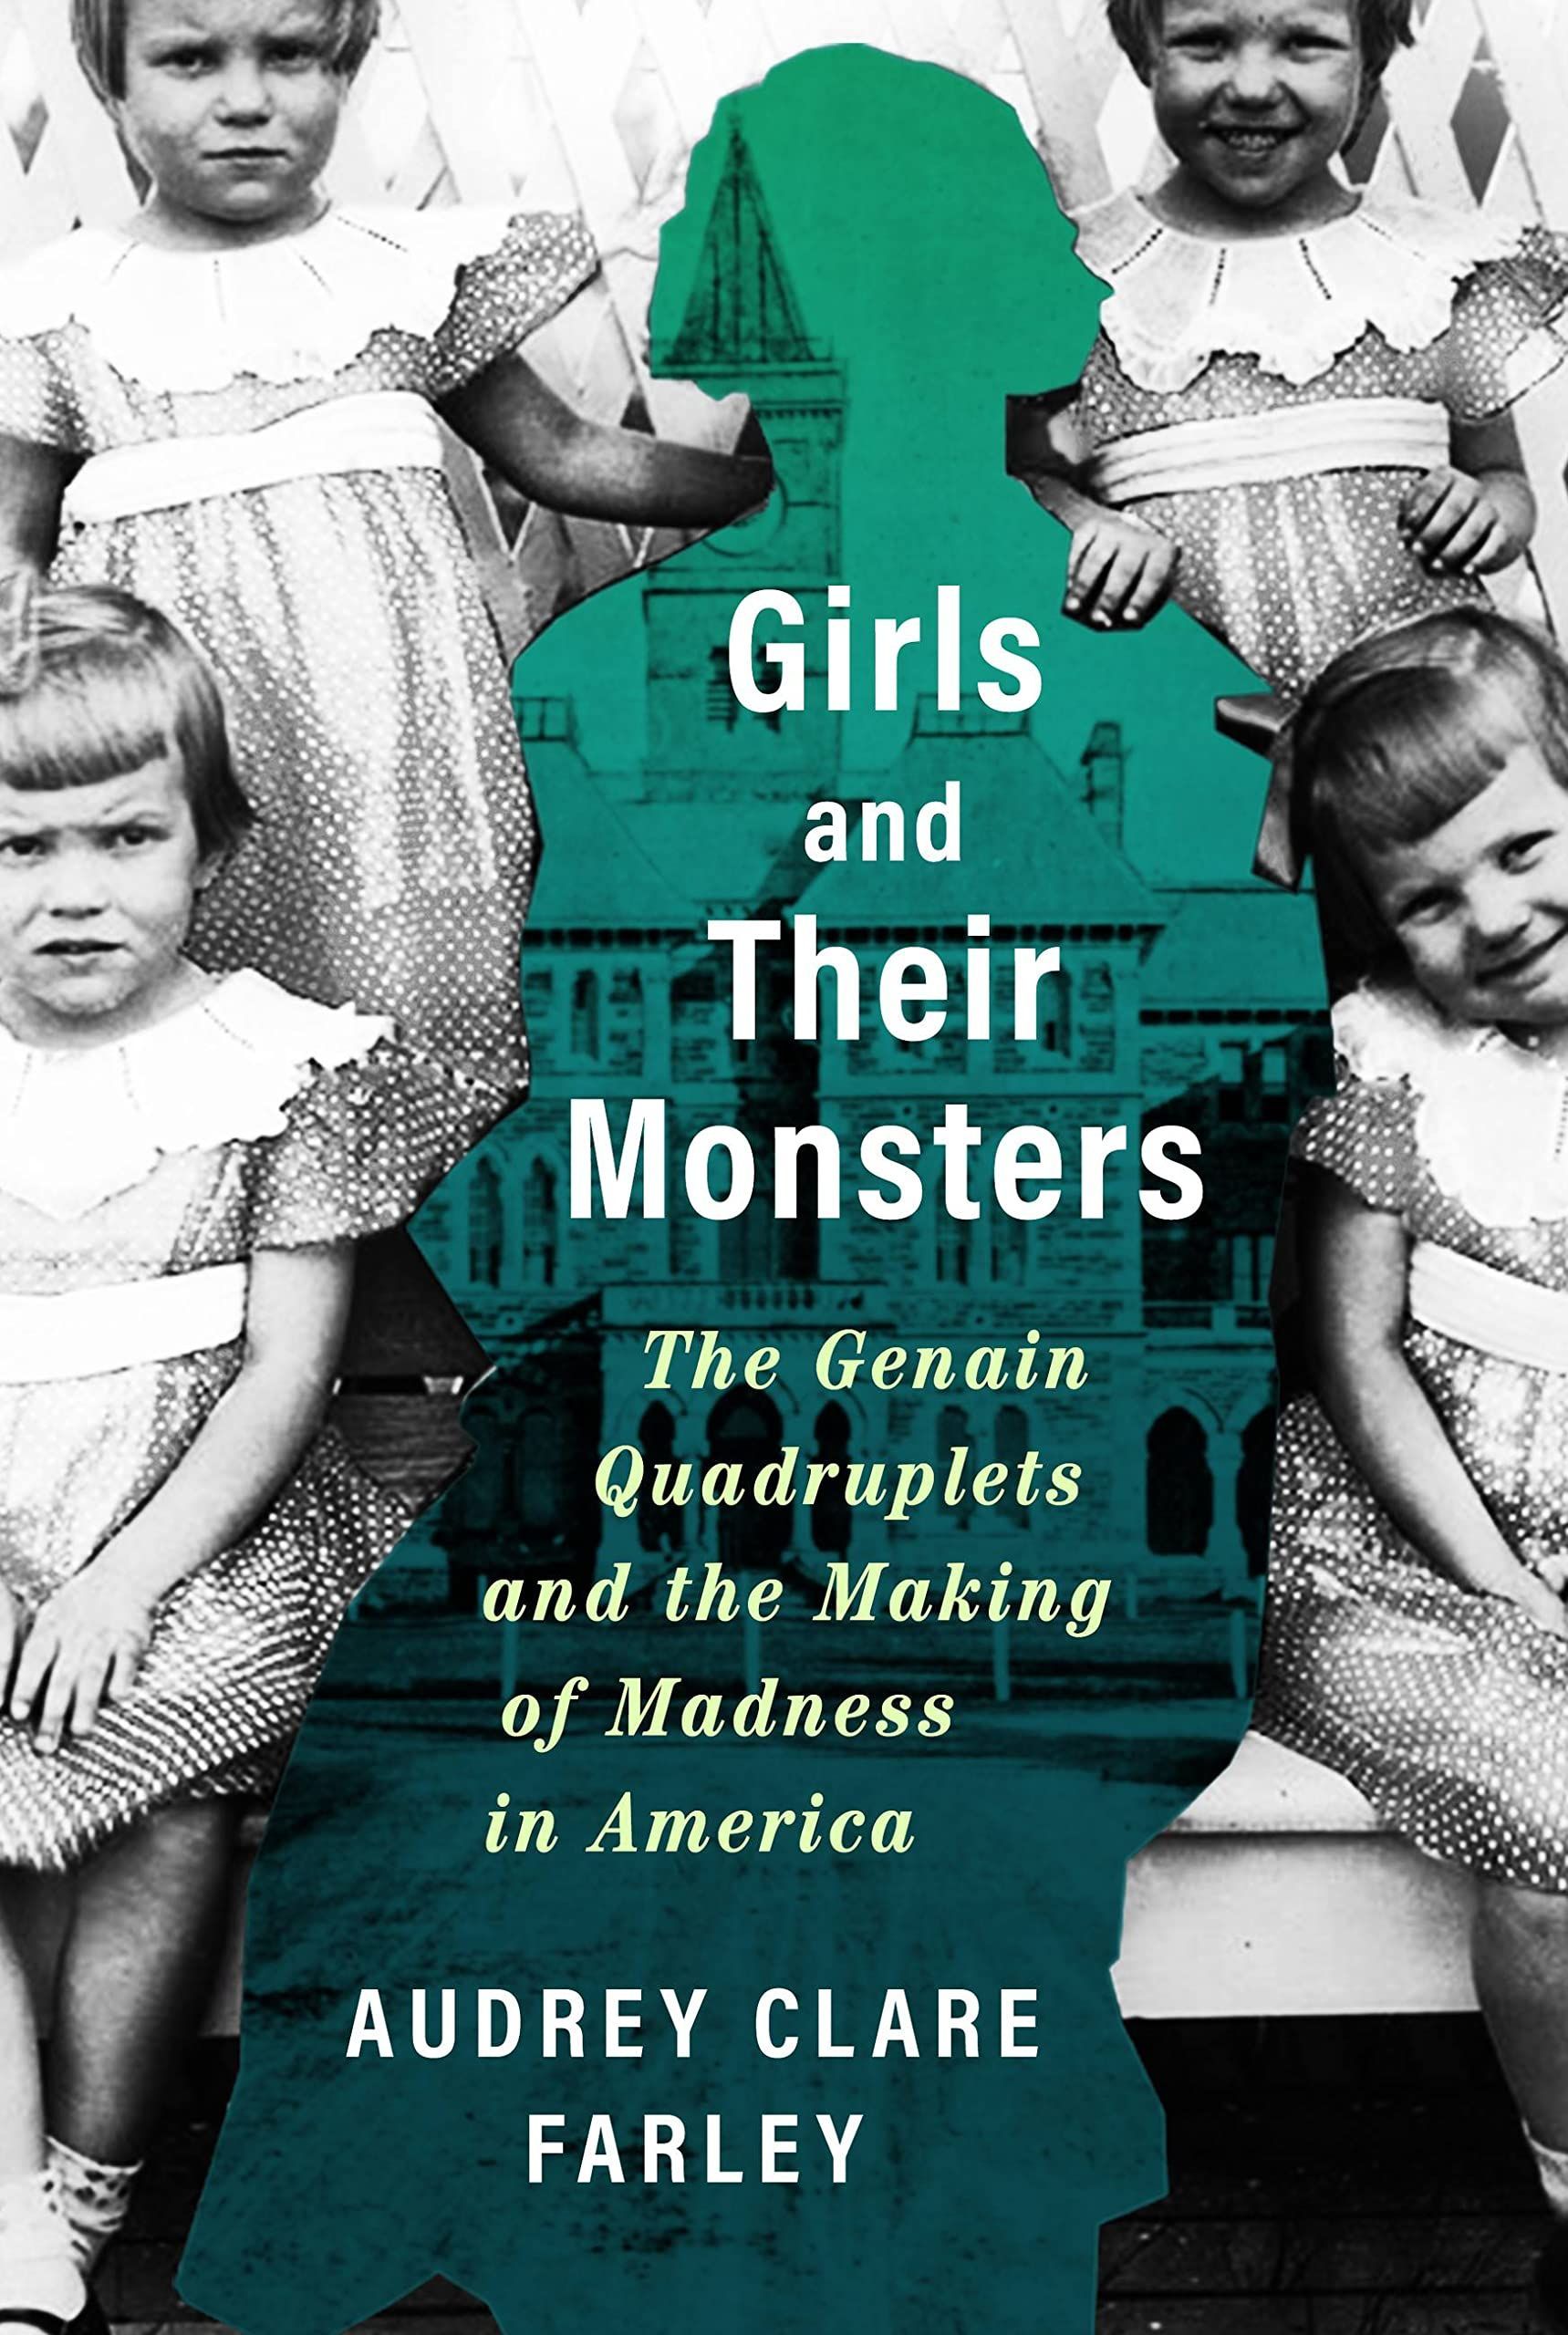 Sleepwalking to Madness in Mid-Century America: On Audrey Clare Farley’s “Girls and Their Monsters”